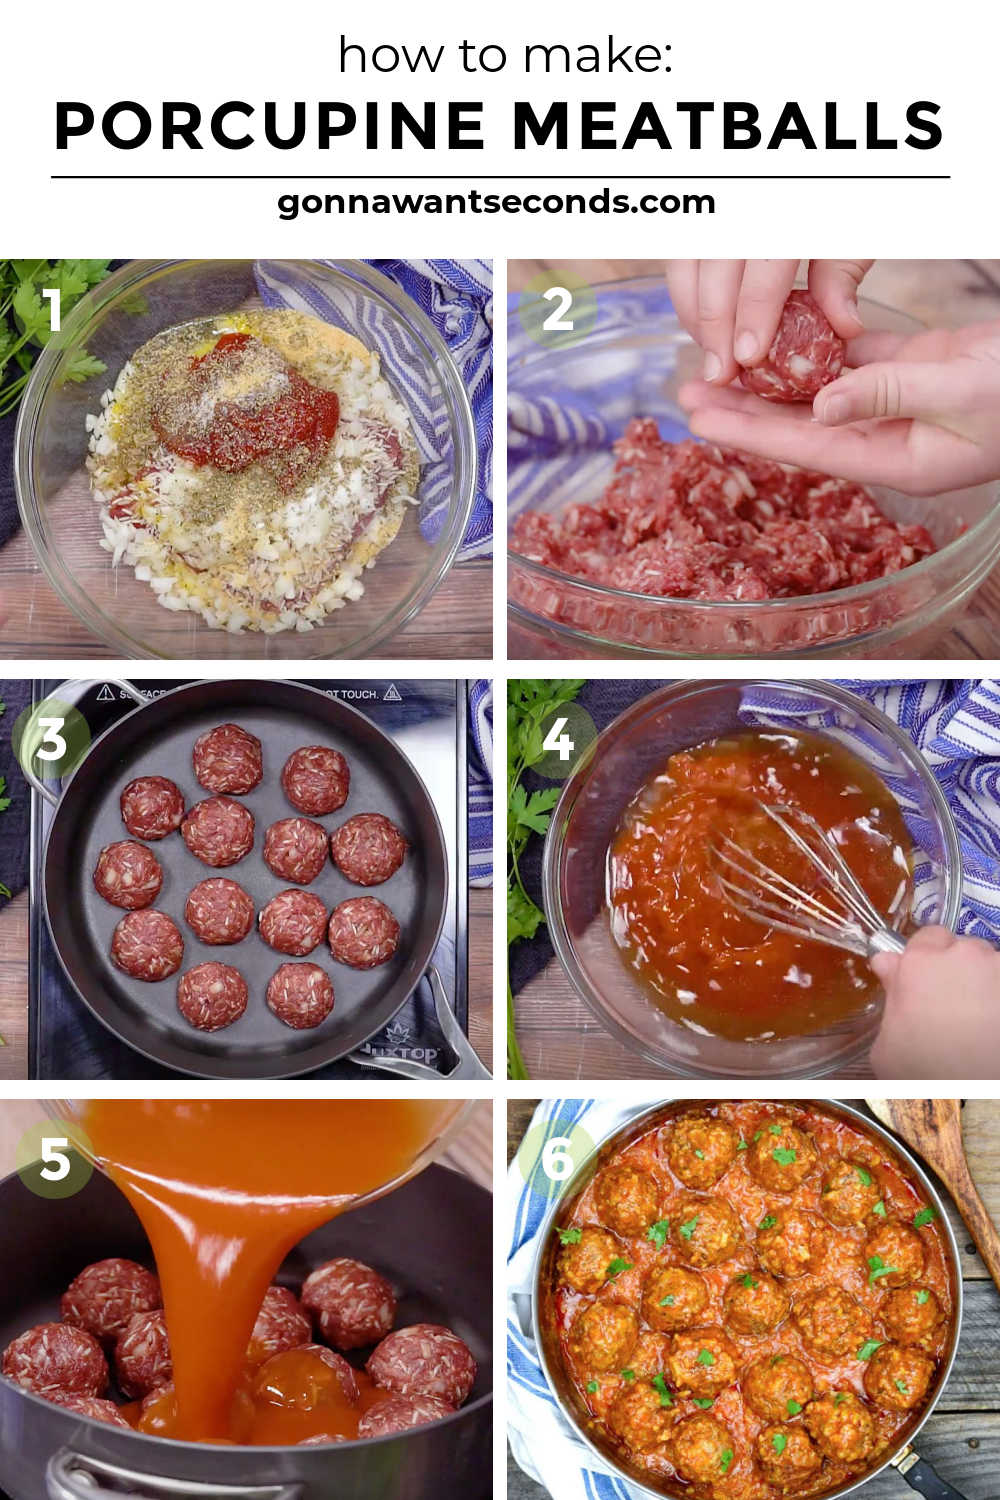 step by step how to make porcupine meatballs